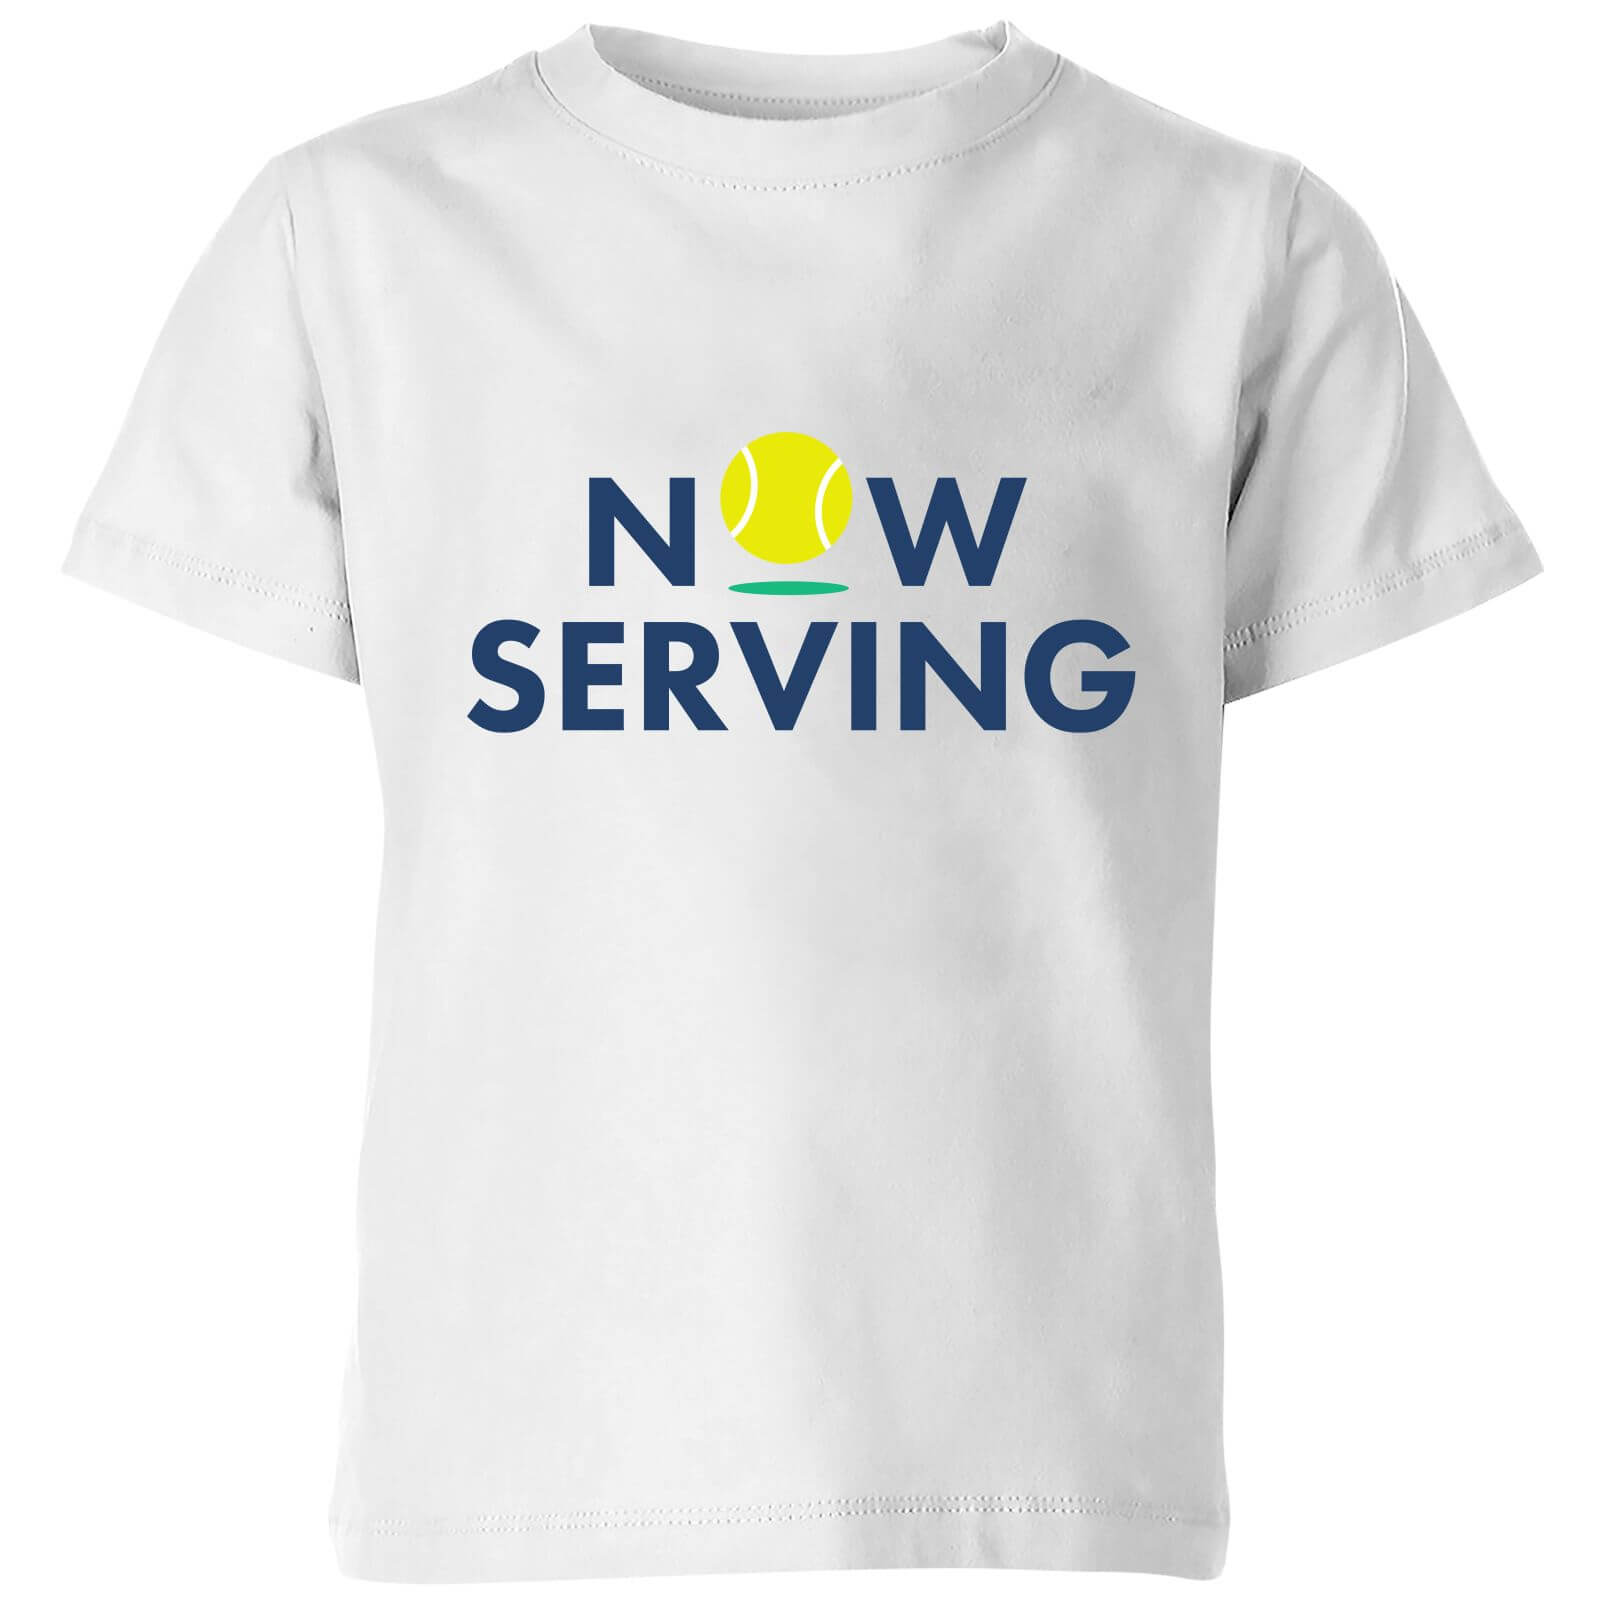 Now Serving Kids' T-Shirt - White - 3-4 Years - White